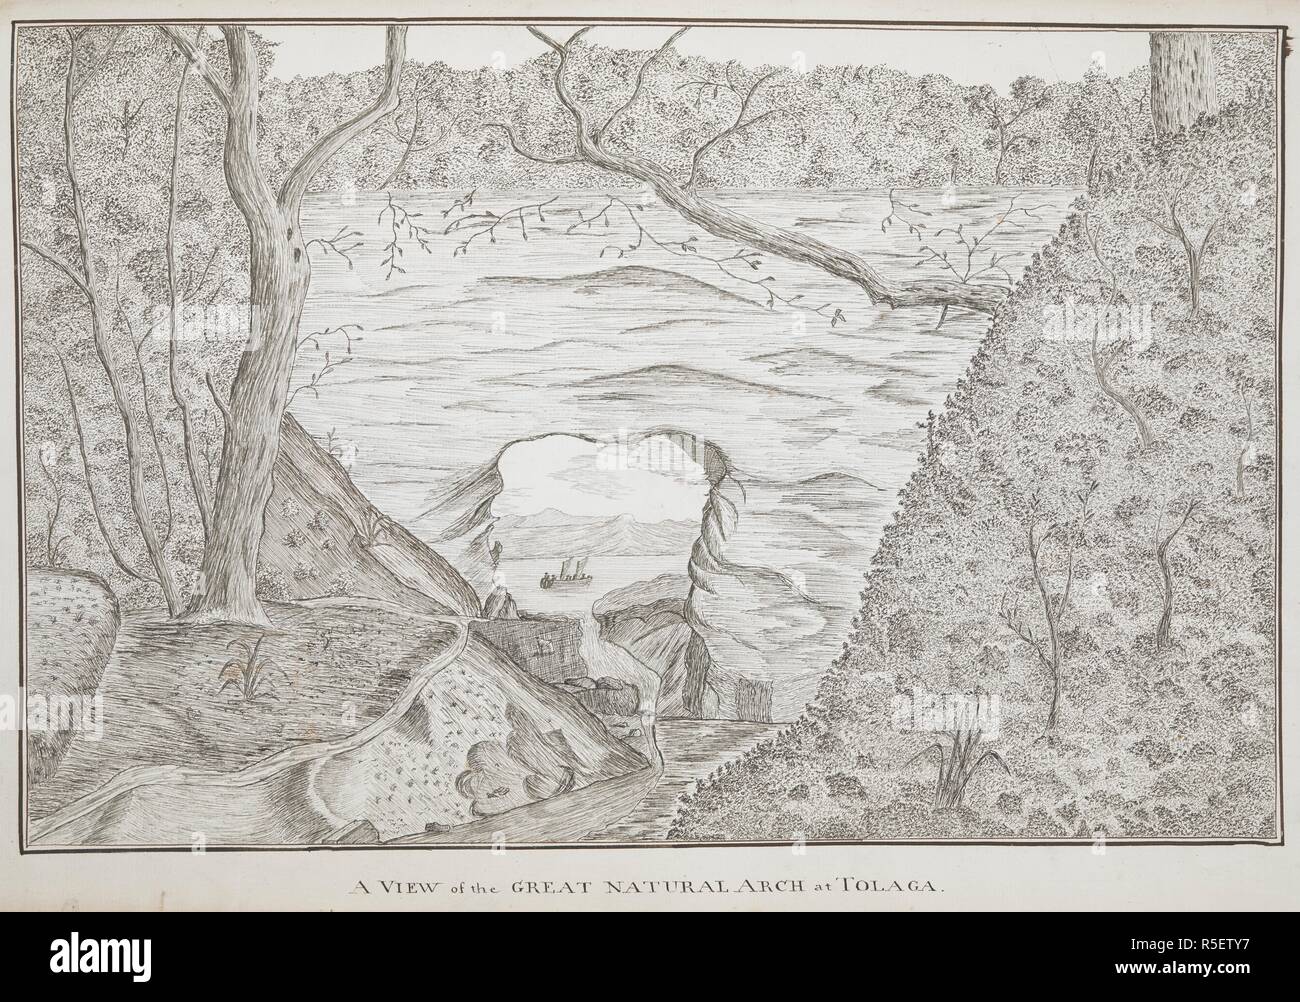 A view of the great natural arch at Tolaga; drawn by Lieut. James Cook. Charts, Plans, Views, and Drawings taken on board the Endeavour during Captain Cook's First Voyage, 1768-1771. 1769. Source: Add. 7085, No.22. Stock Photo